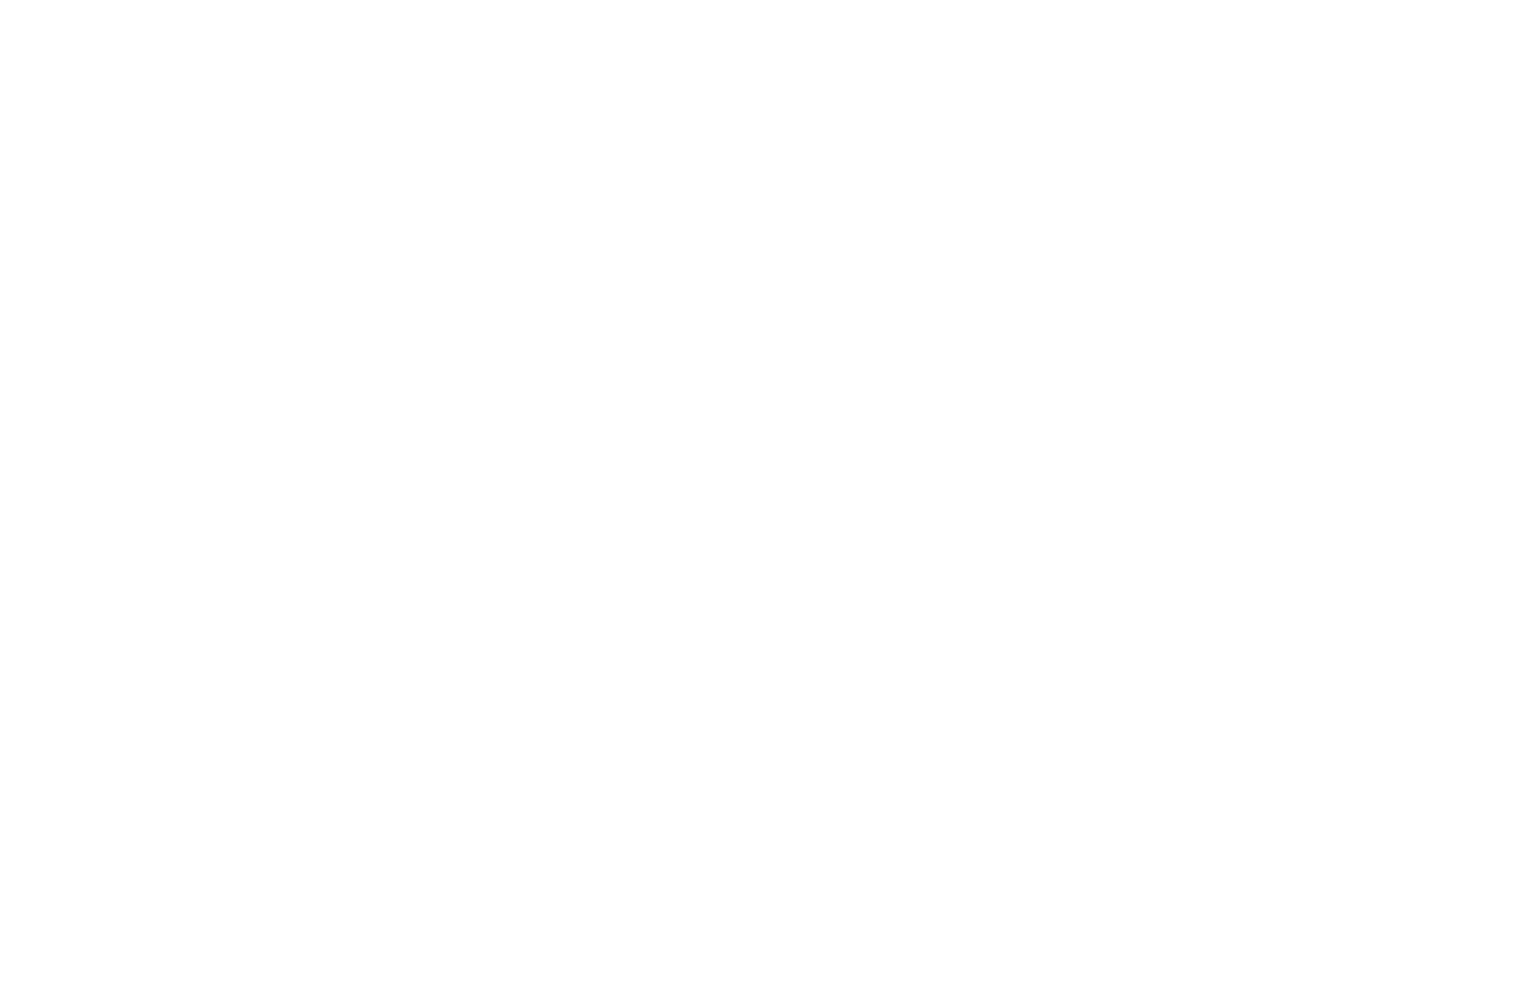 Full Truckload Carrier and Transportation Services